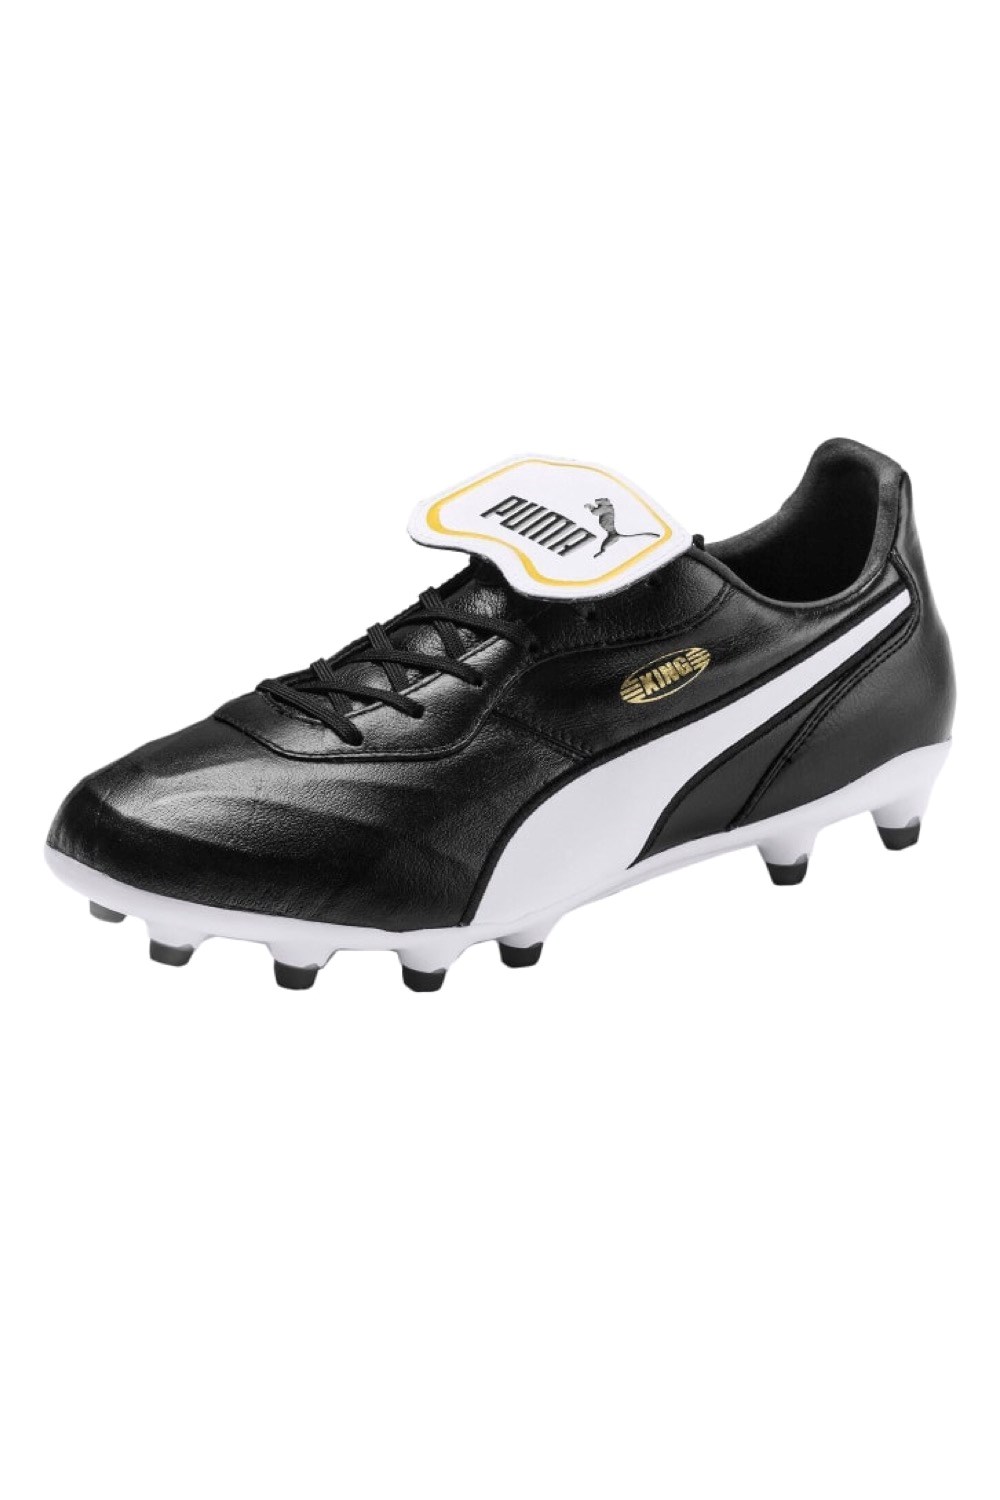 King Top Leather Mens Football Boots -